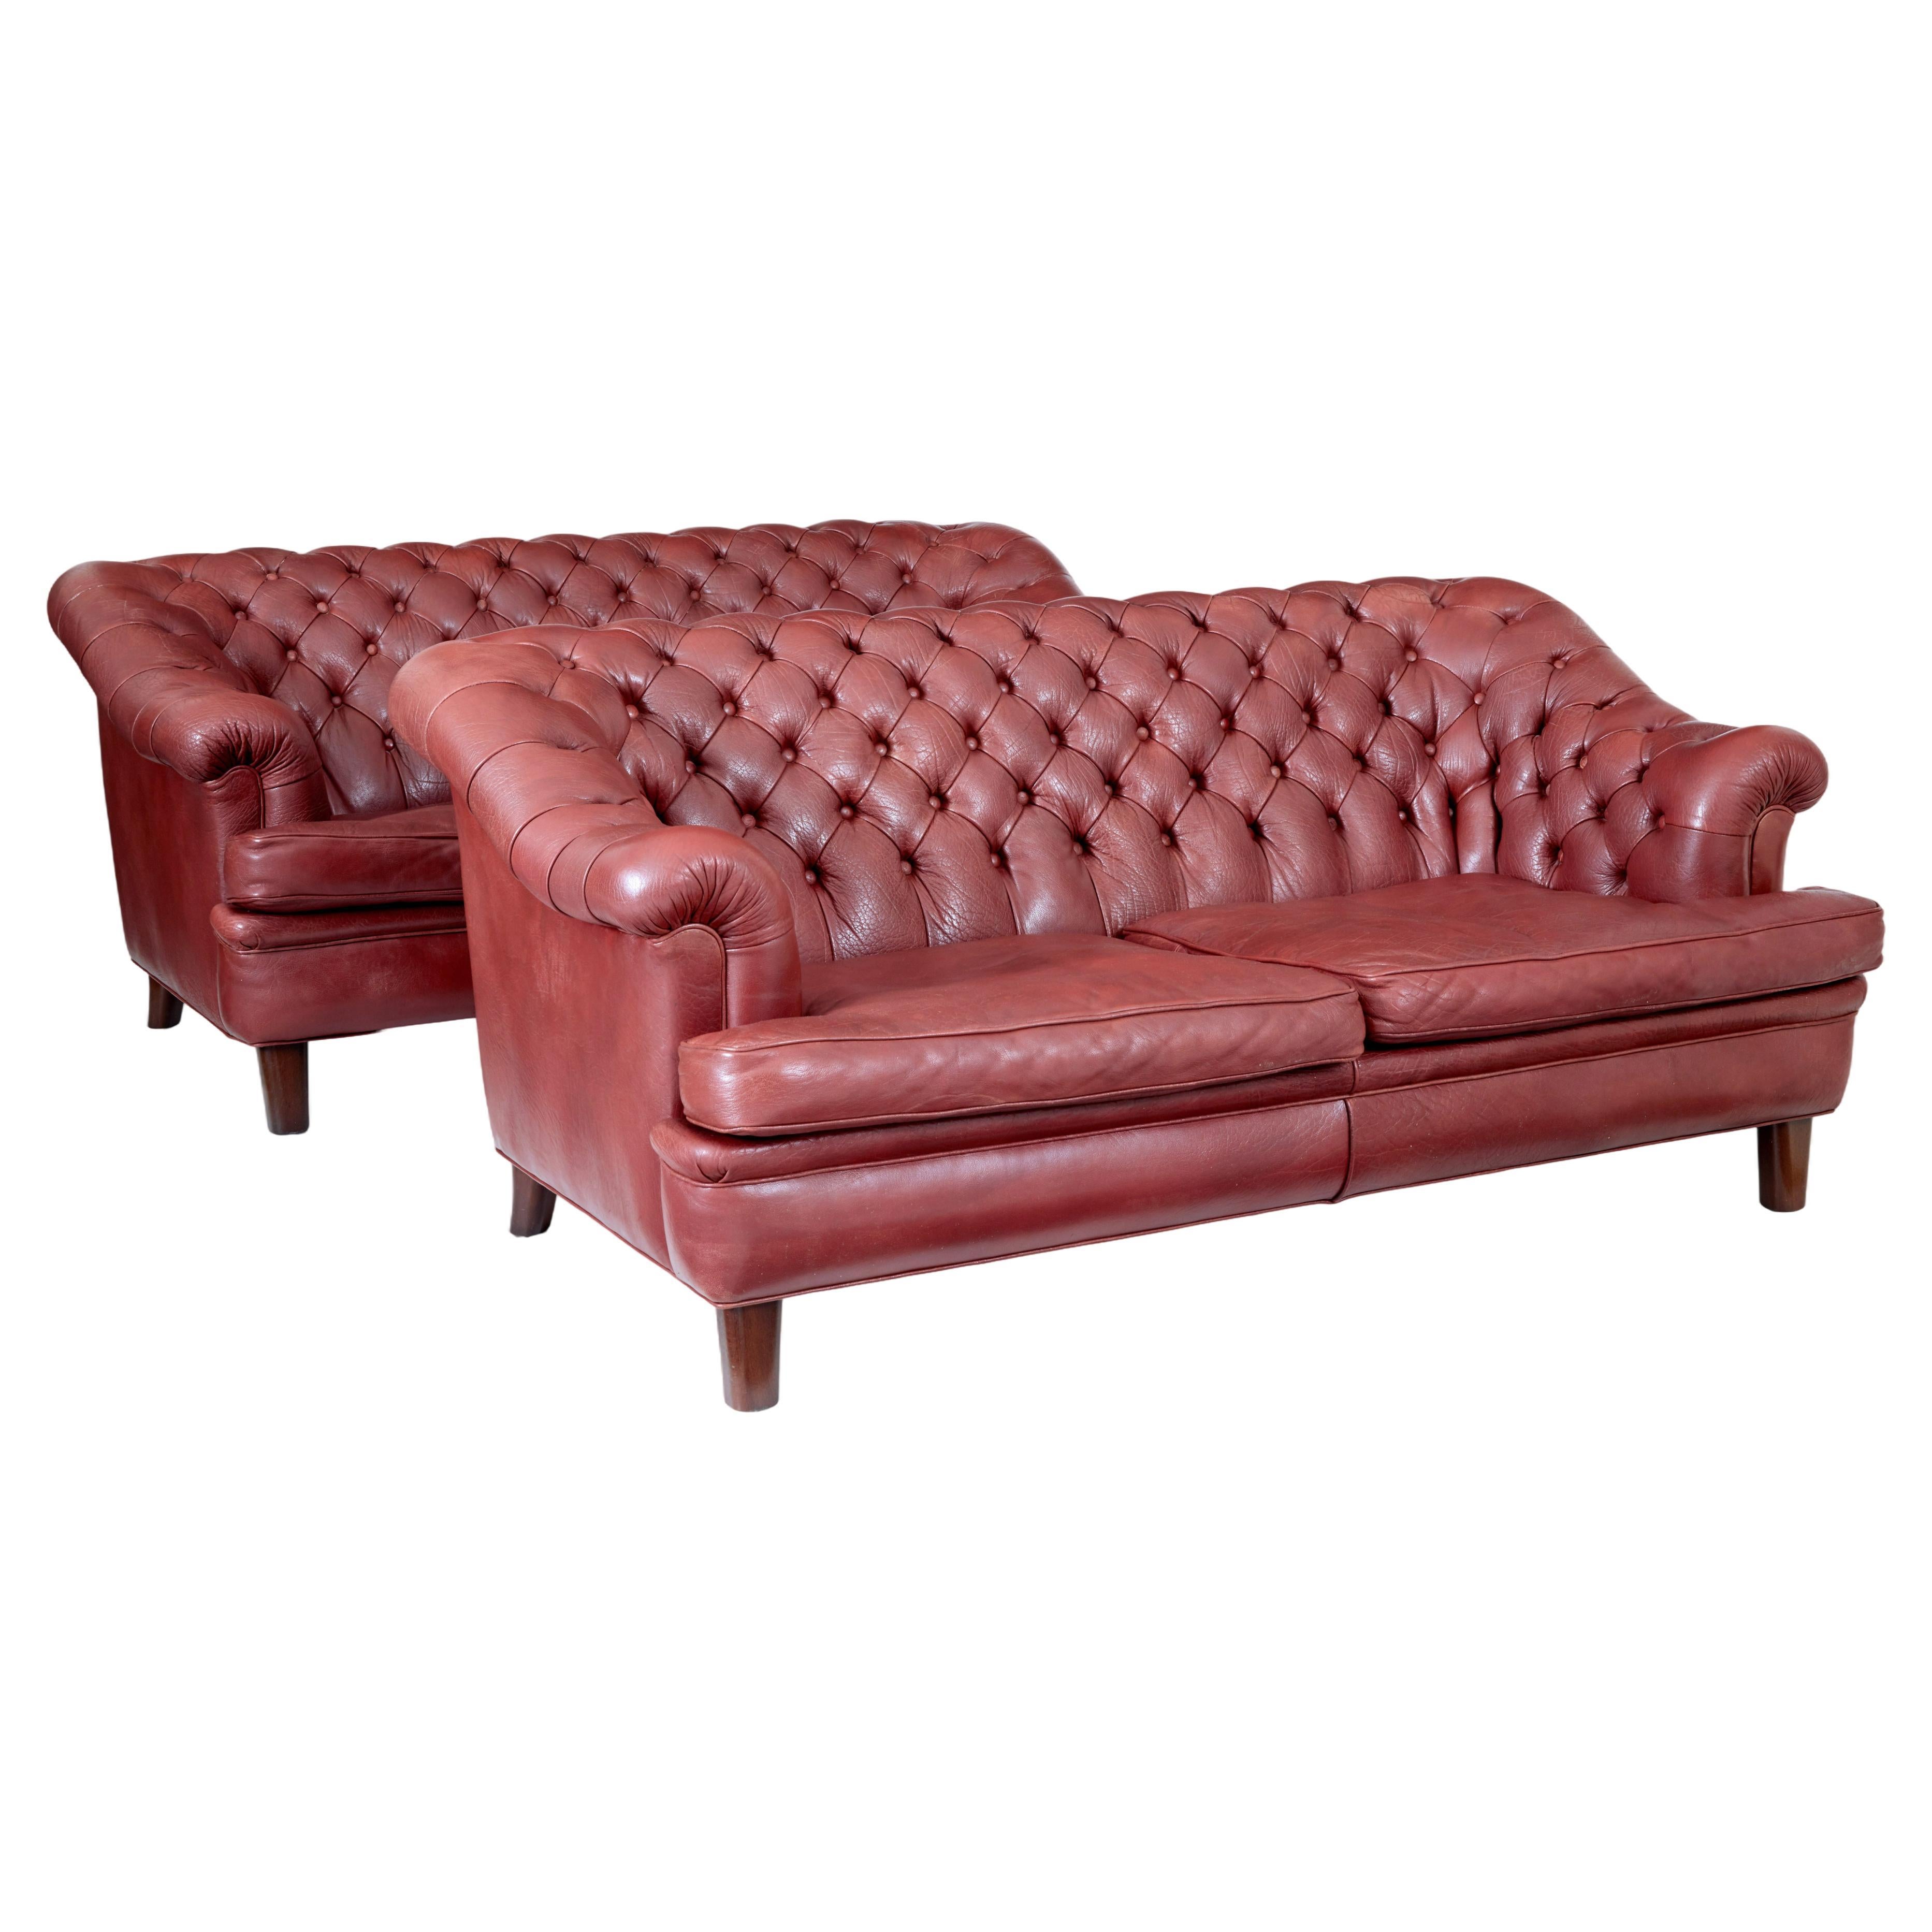 Pair of mid 20th century leather Chesterfield sofas For Sale